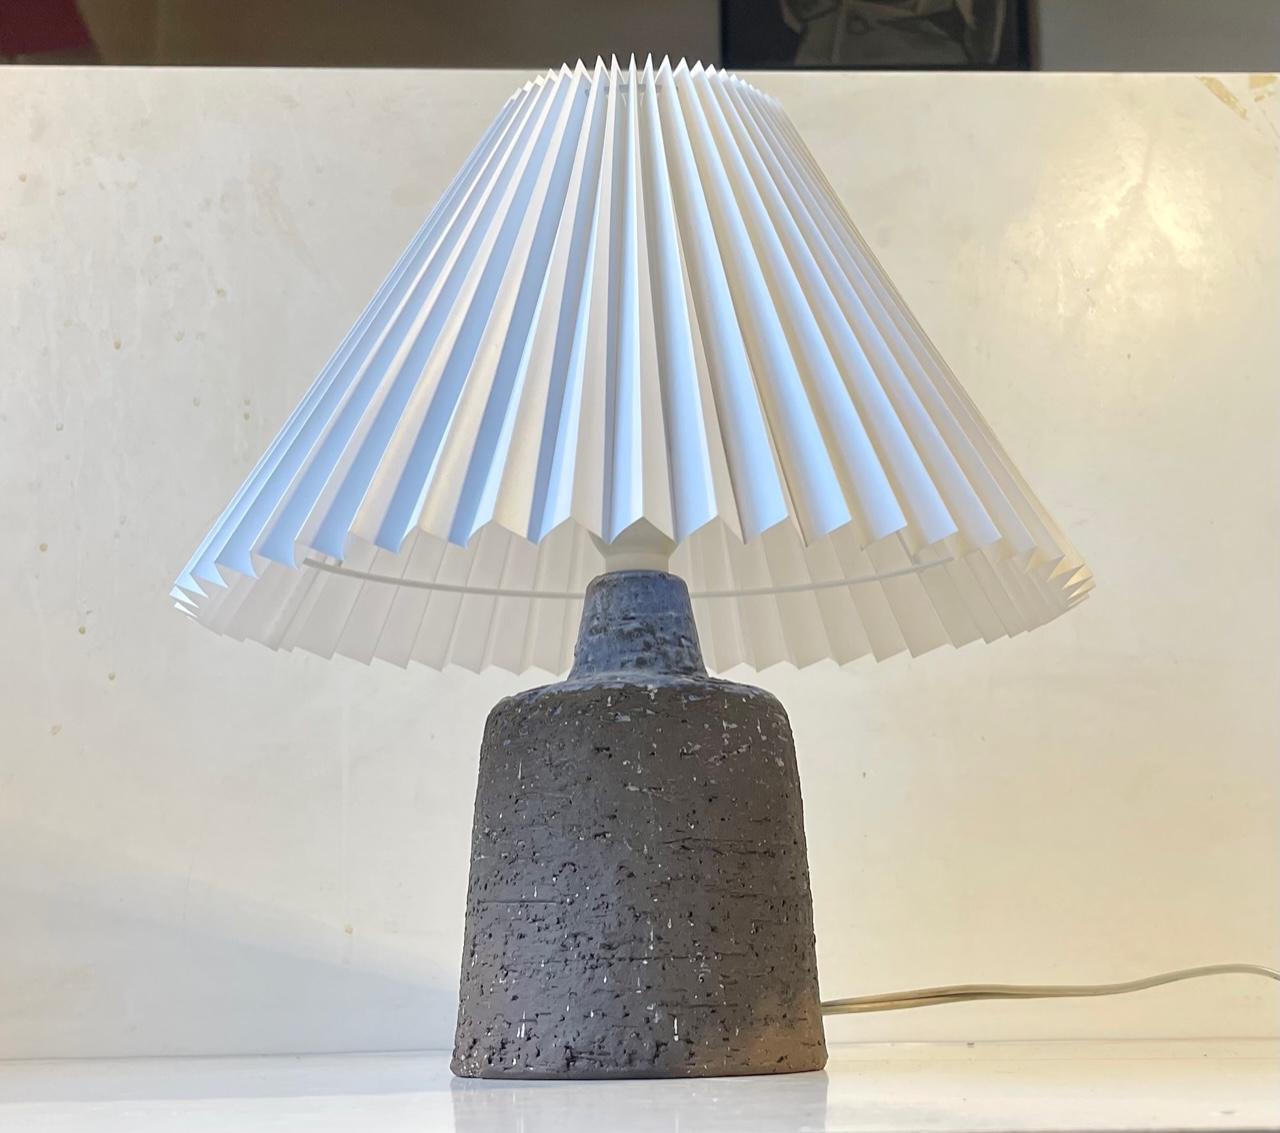 Stylish mallet shaped stoneware table lamp with fluted white Danish shade. The base exhibits a delicate light-purple glaze and an incised cubist motif. Designed and made in Denmark circa 1970. Measurements: height: 35 cm, diameter: 30 cm (shade).